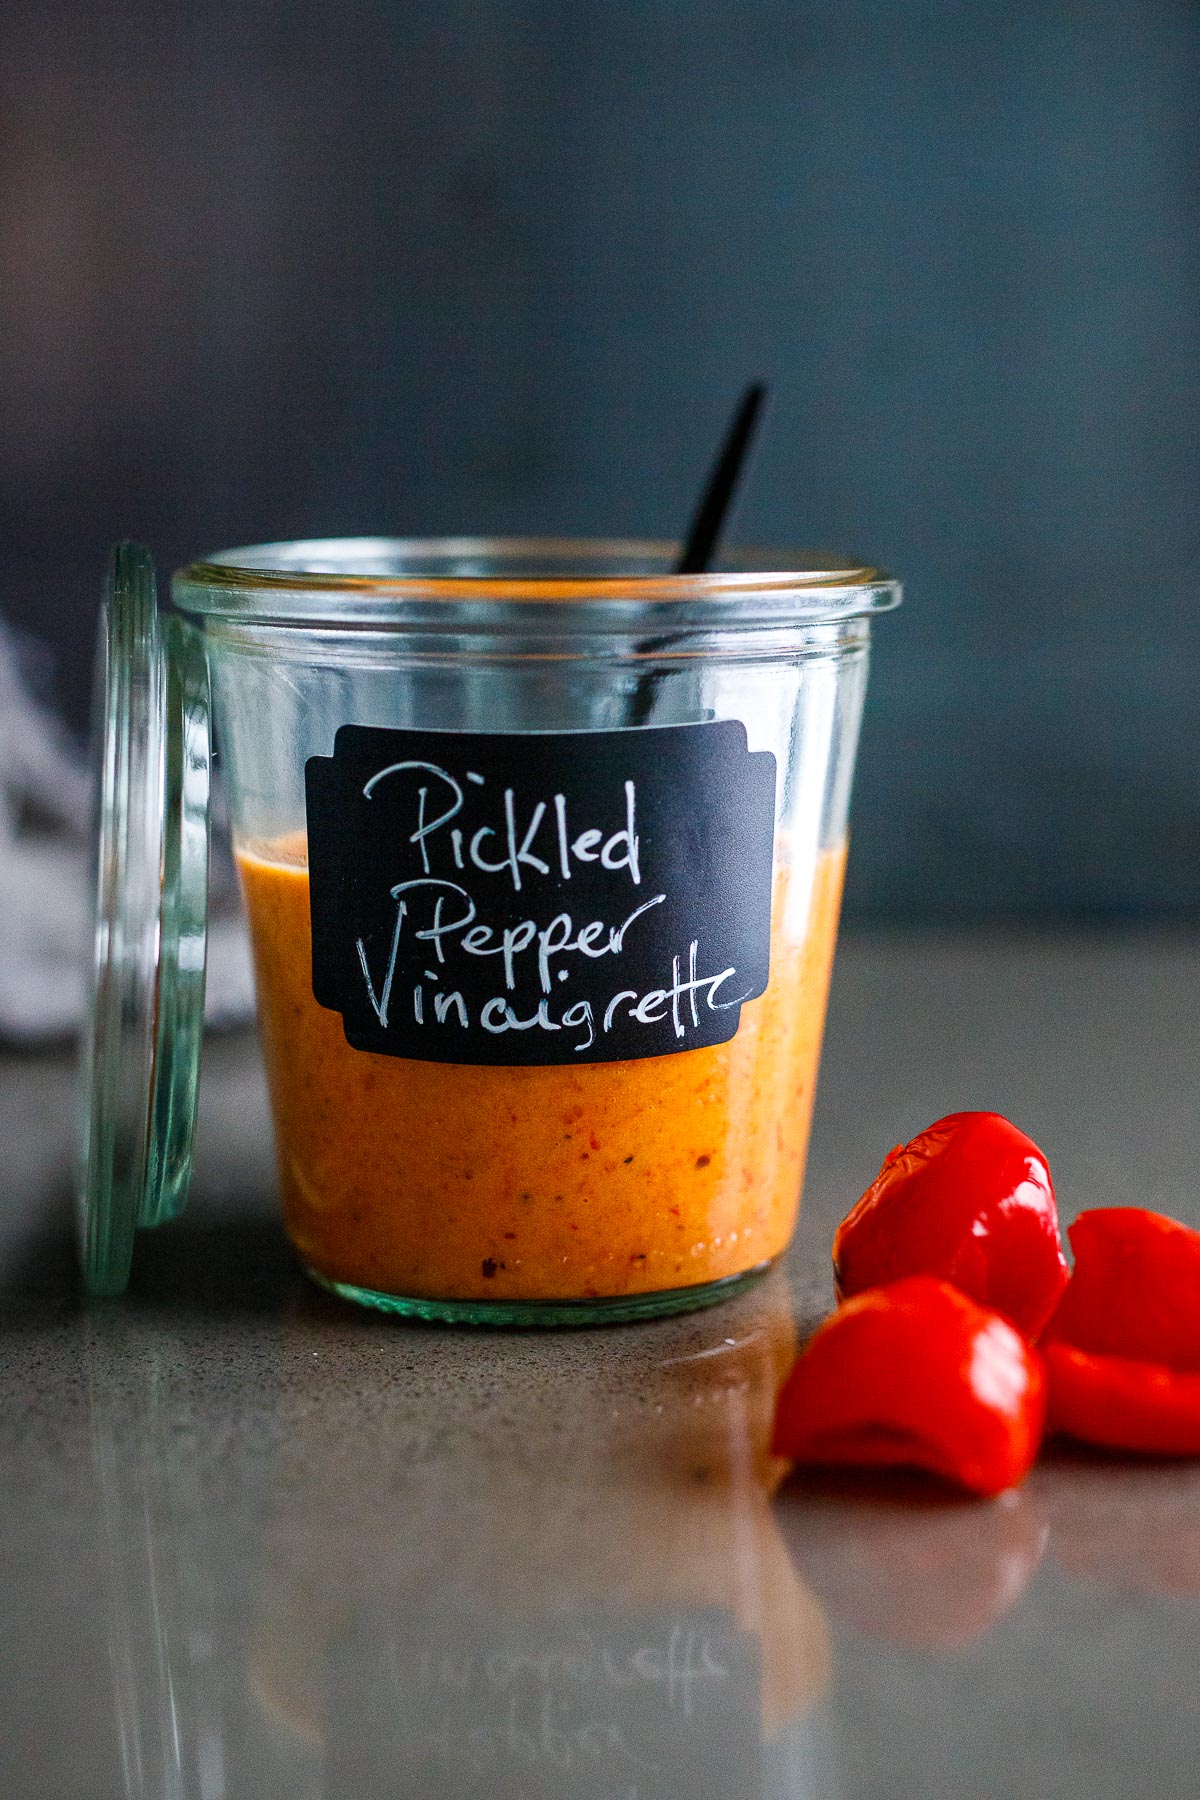 Add a burst of flavor with Pickled Pepper Vinaigrette! Delicious on fish, seafood, veggies, tofu, or drizzle over Buddha bowls, you'll find many uses for this flavor bomb!